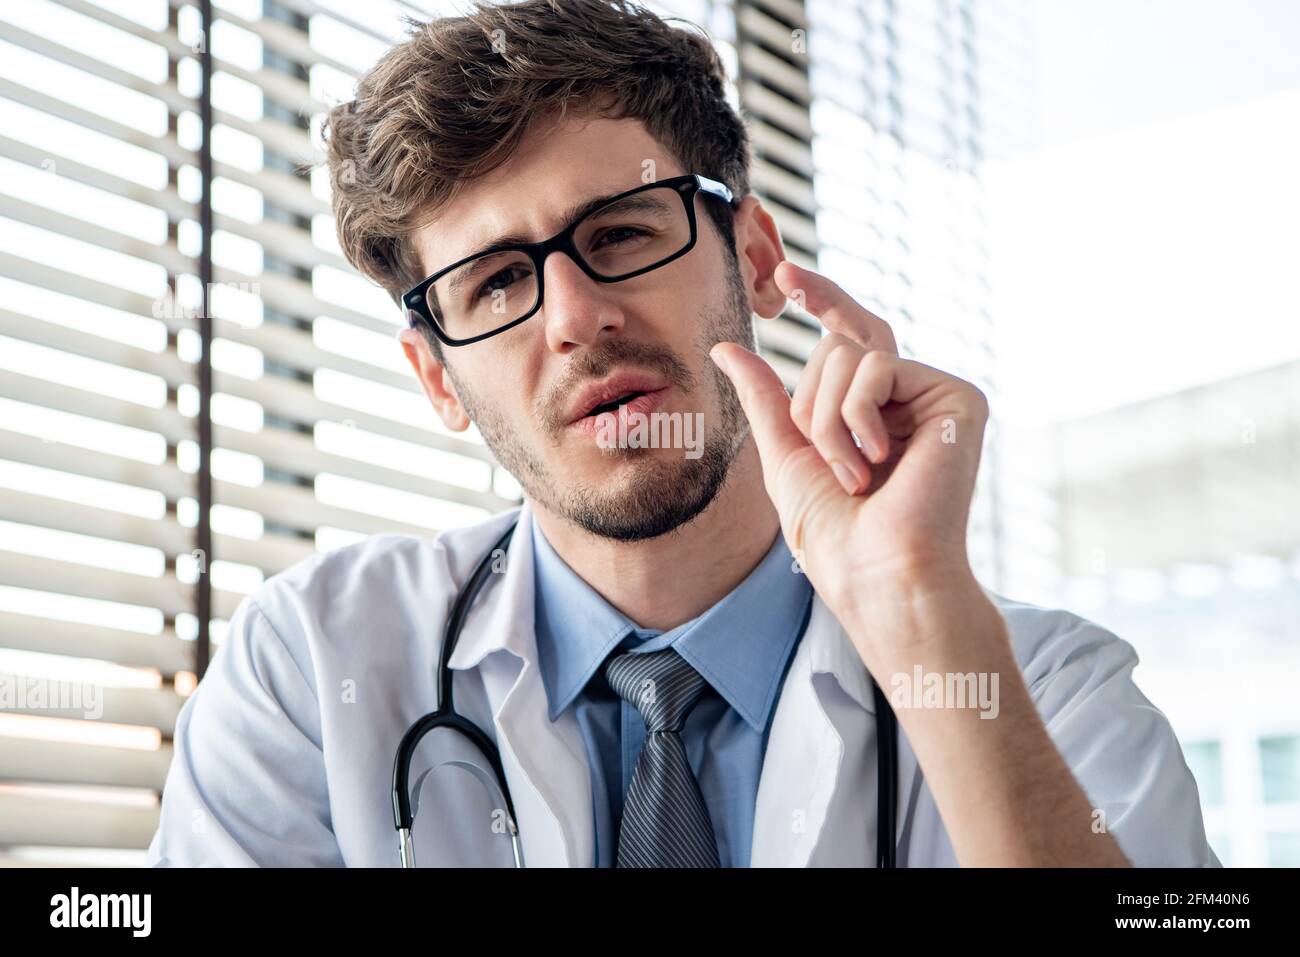 Caucasian male doctor looking at camera explaining patient in video call meeting, online medical consultation and telehealth concepts Stock Photo